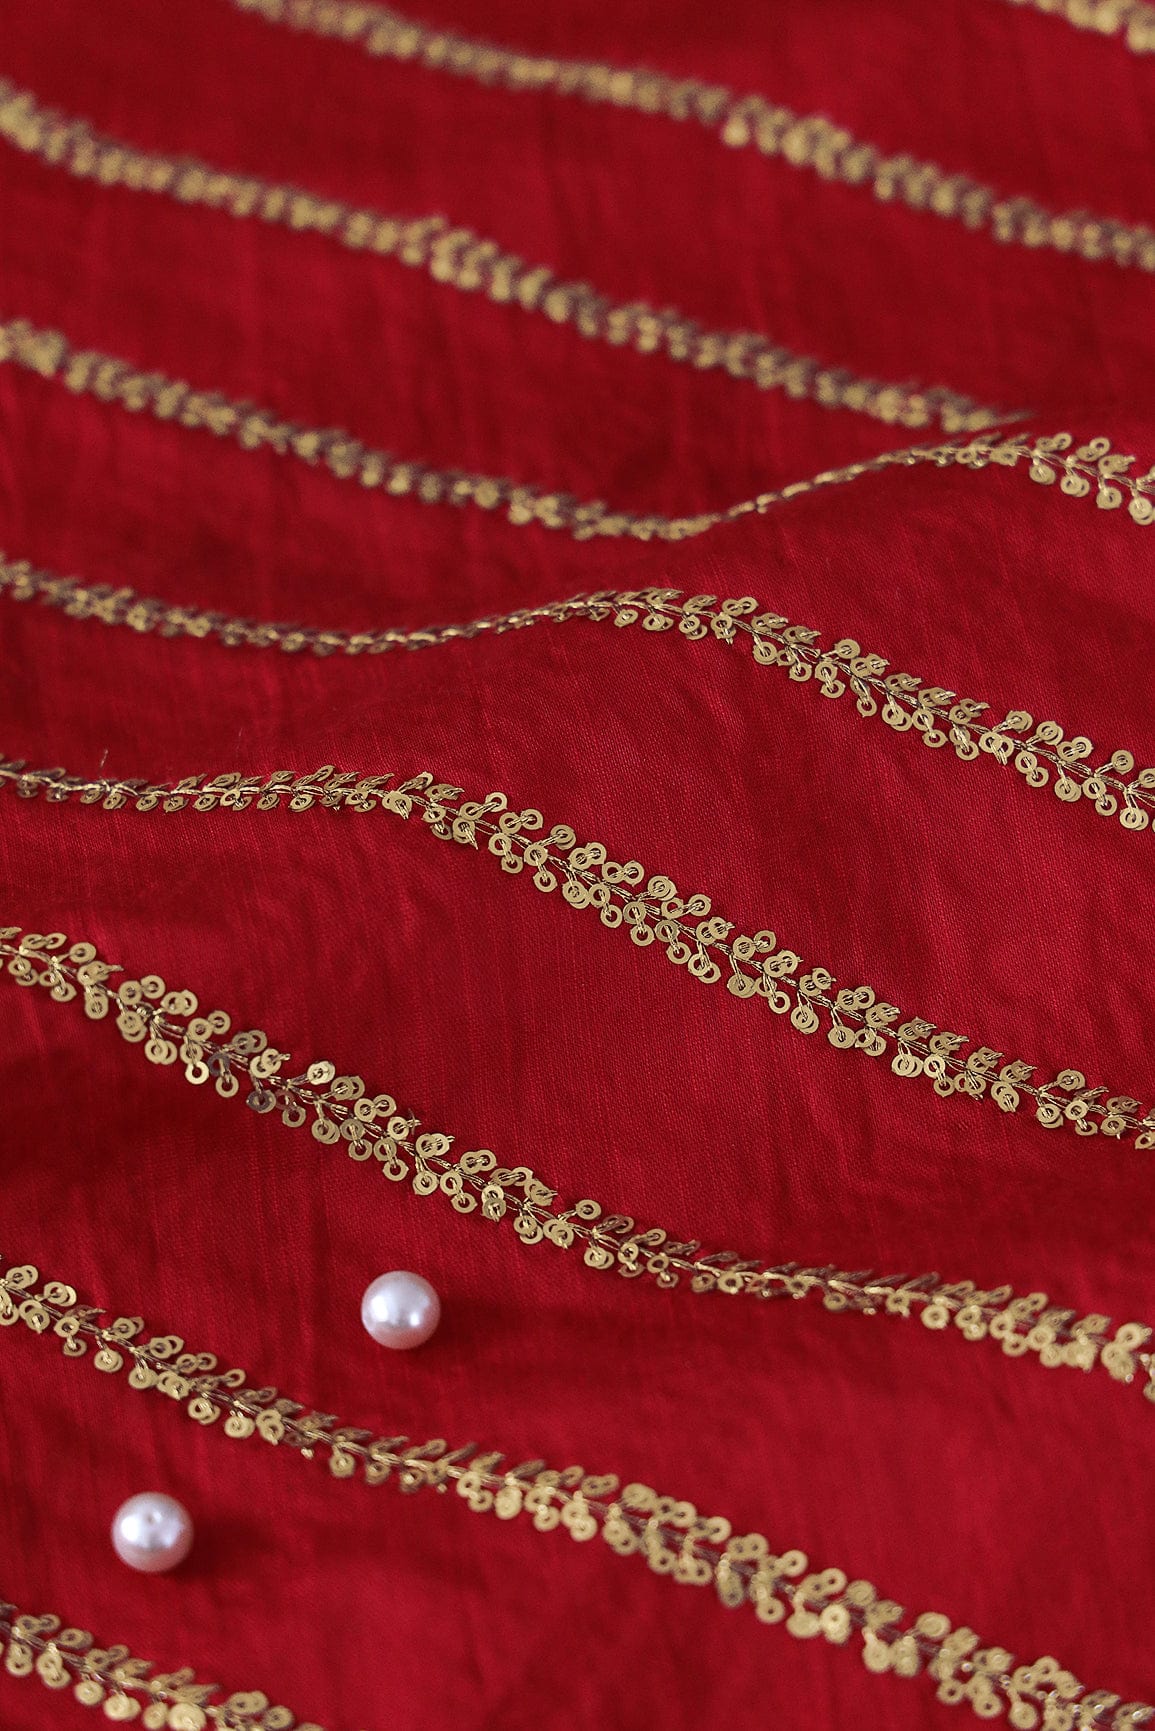 doeraa Embroidery Fabrics 1 Meter Cut Piece Of Gold Sequins With Gold Zari Stripes Embroidery Work On Red Raw Silk Fabric